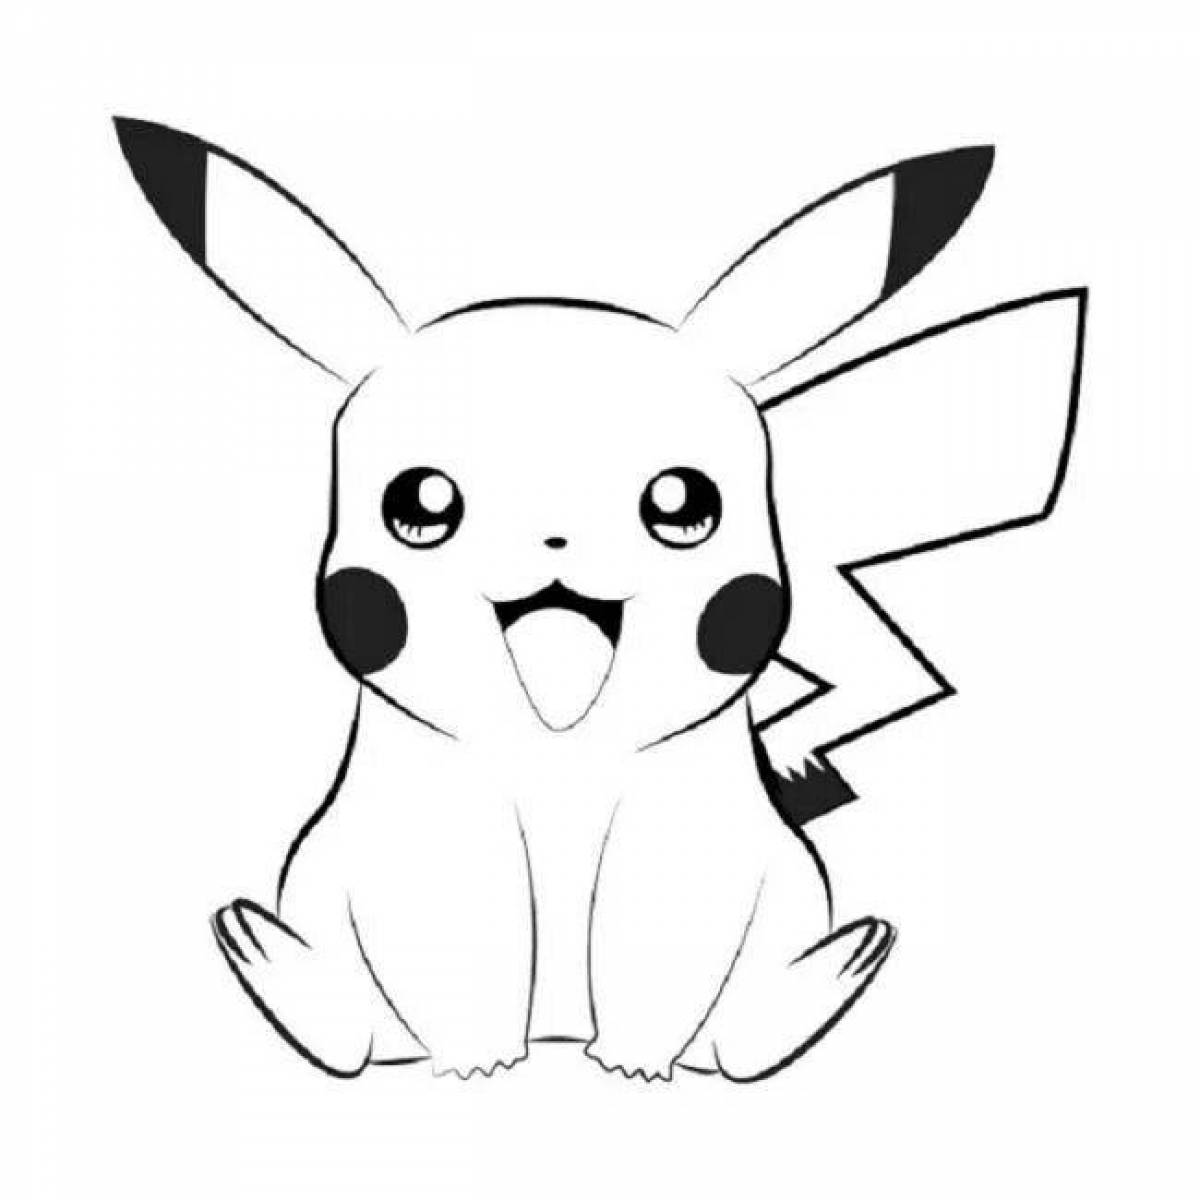 Blissful pikachu coloring page